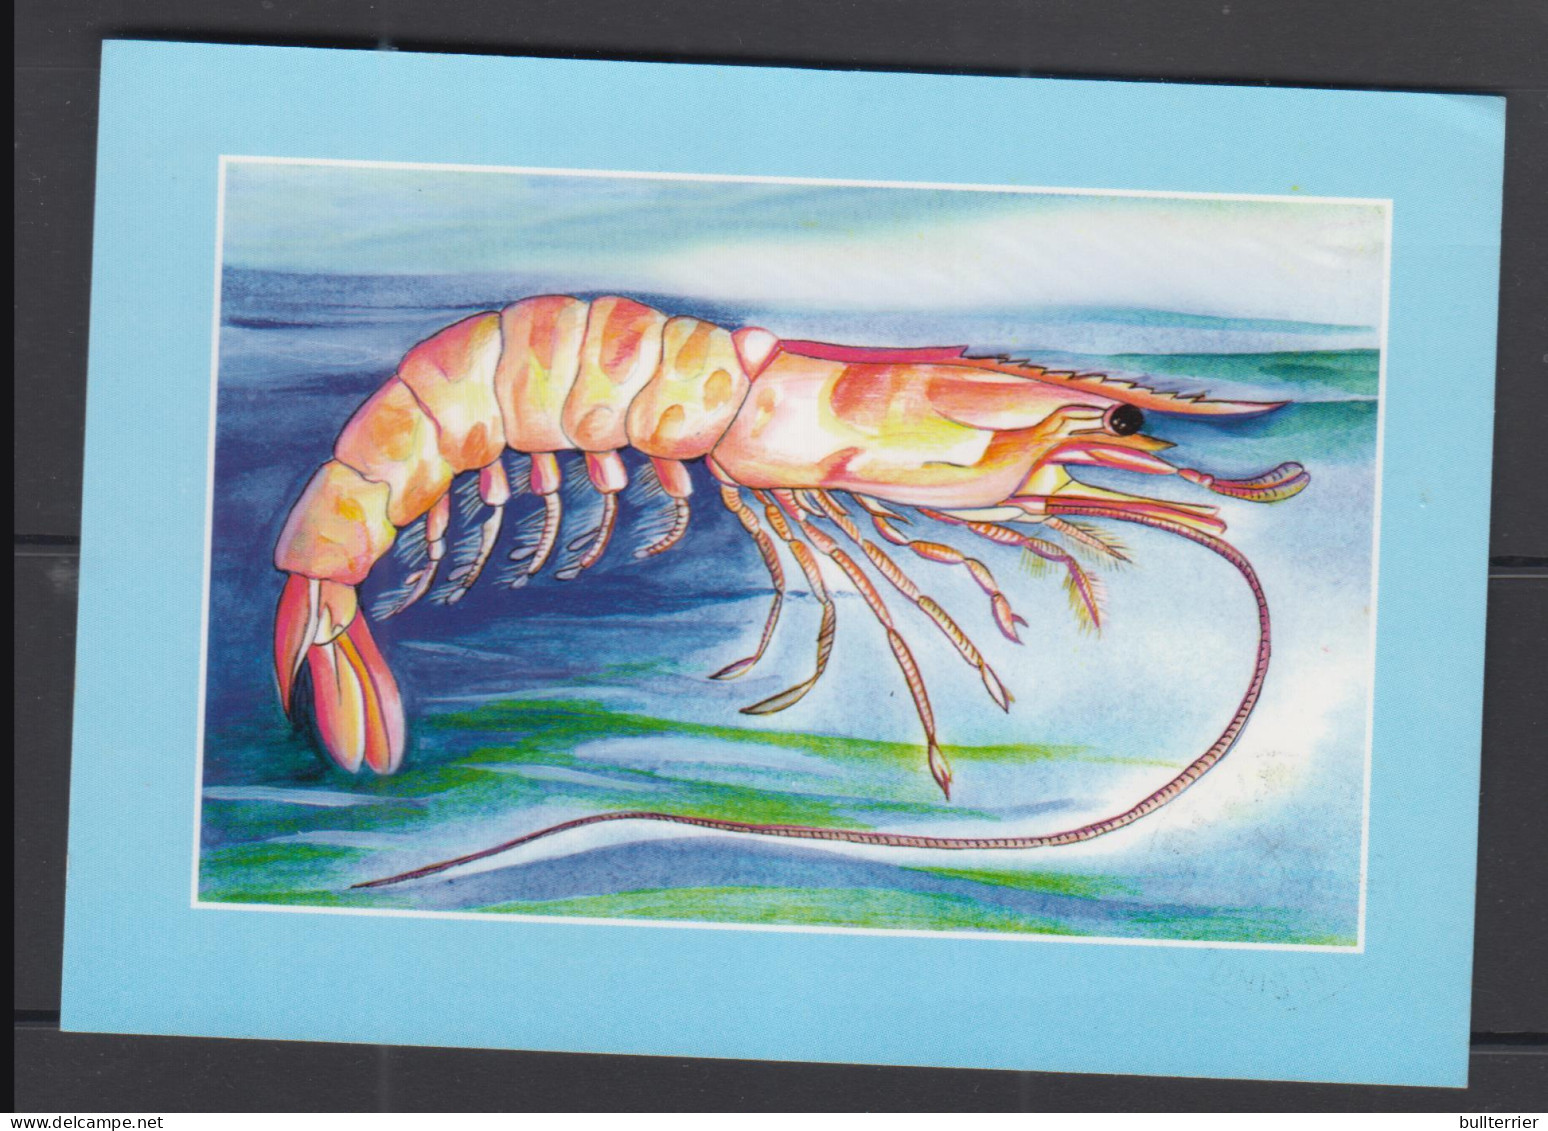 MARINE LIFE - TUNISIA - 1999 - POSTCARD TO  GERMANY WITH CRUSTACEANS SET OF 3 IMPERF - Crustacés